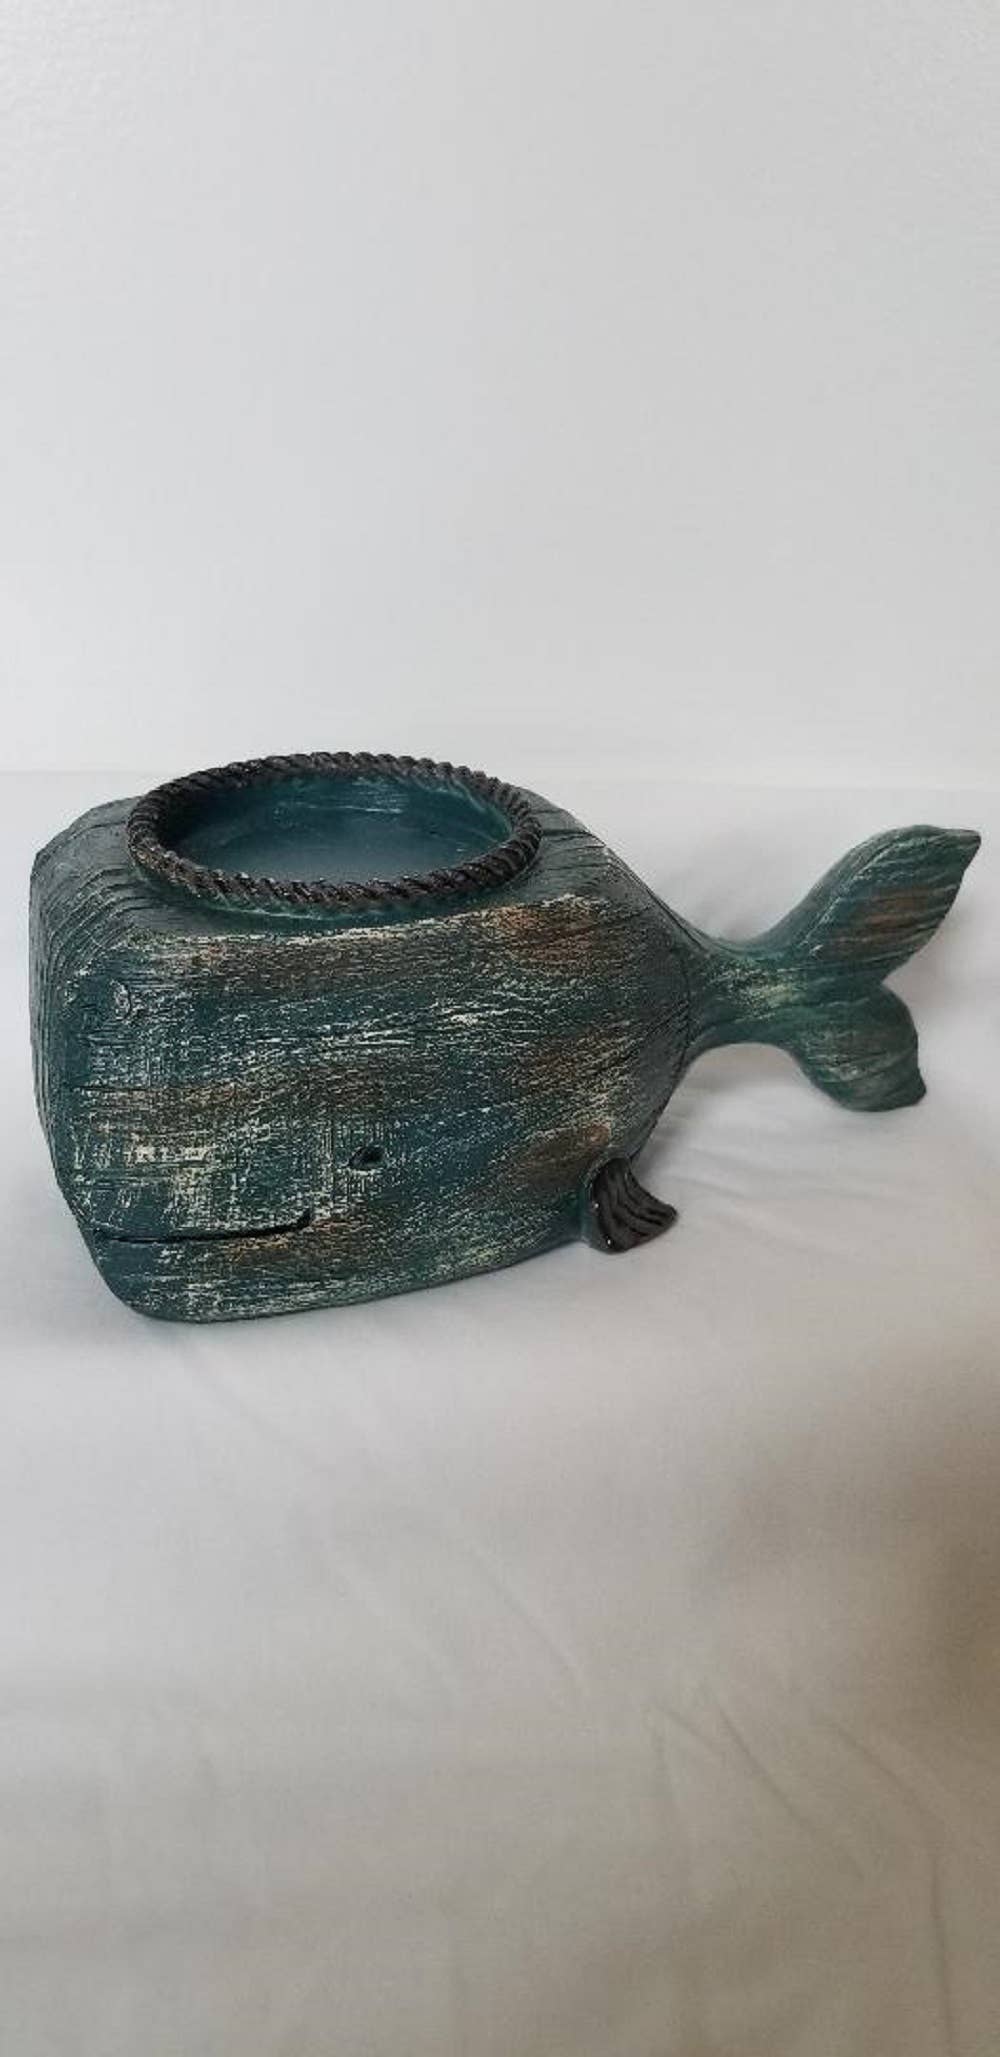 Blue Whale Candle Holder